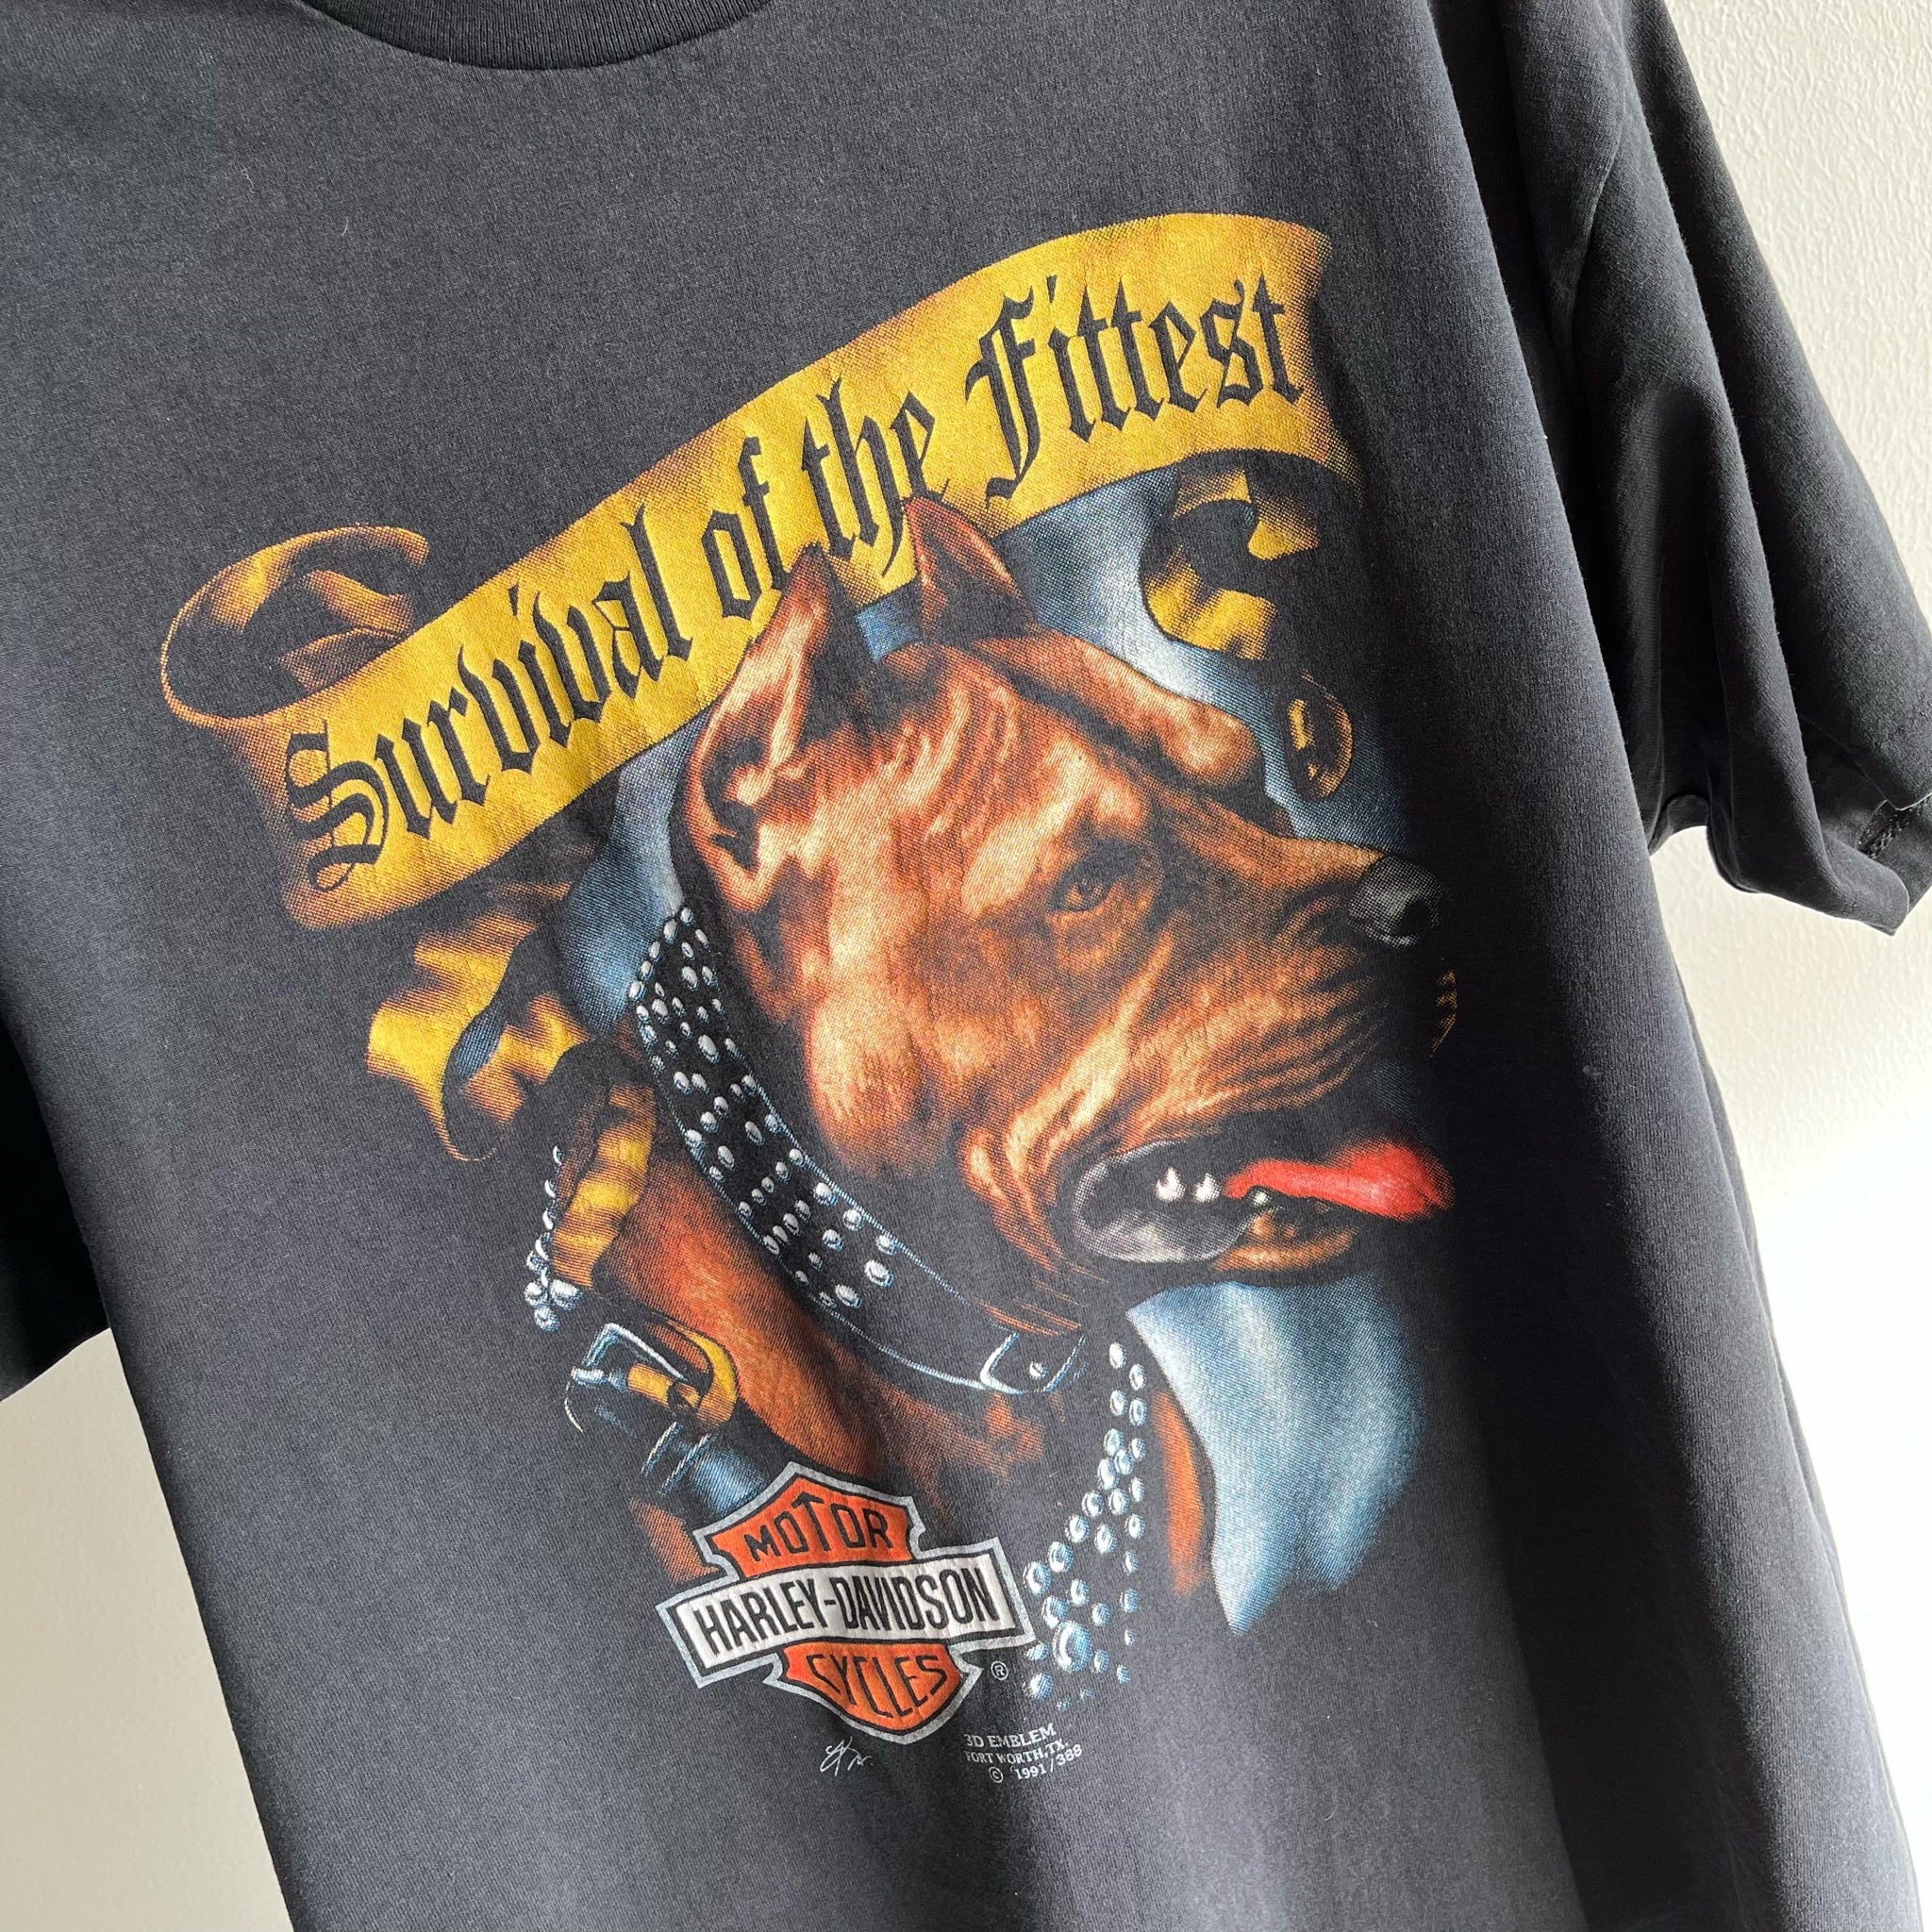 1991 3D Emblem Survival of the Fittest - Harley T-Shirt - Collectible!